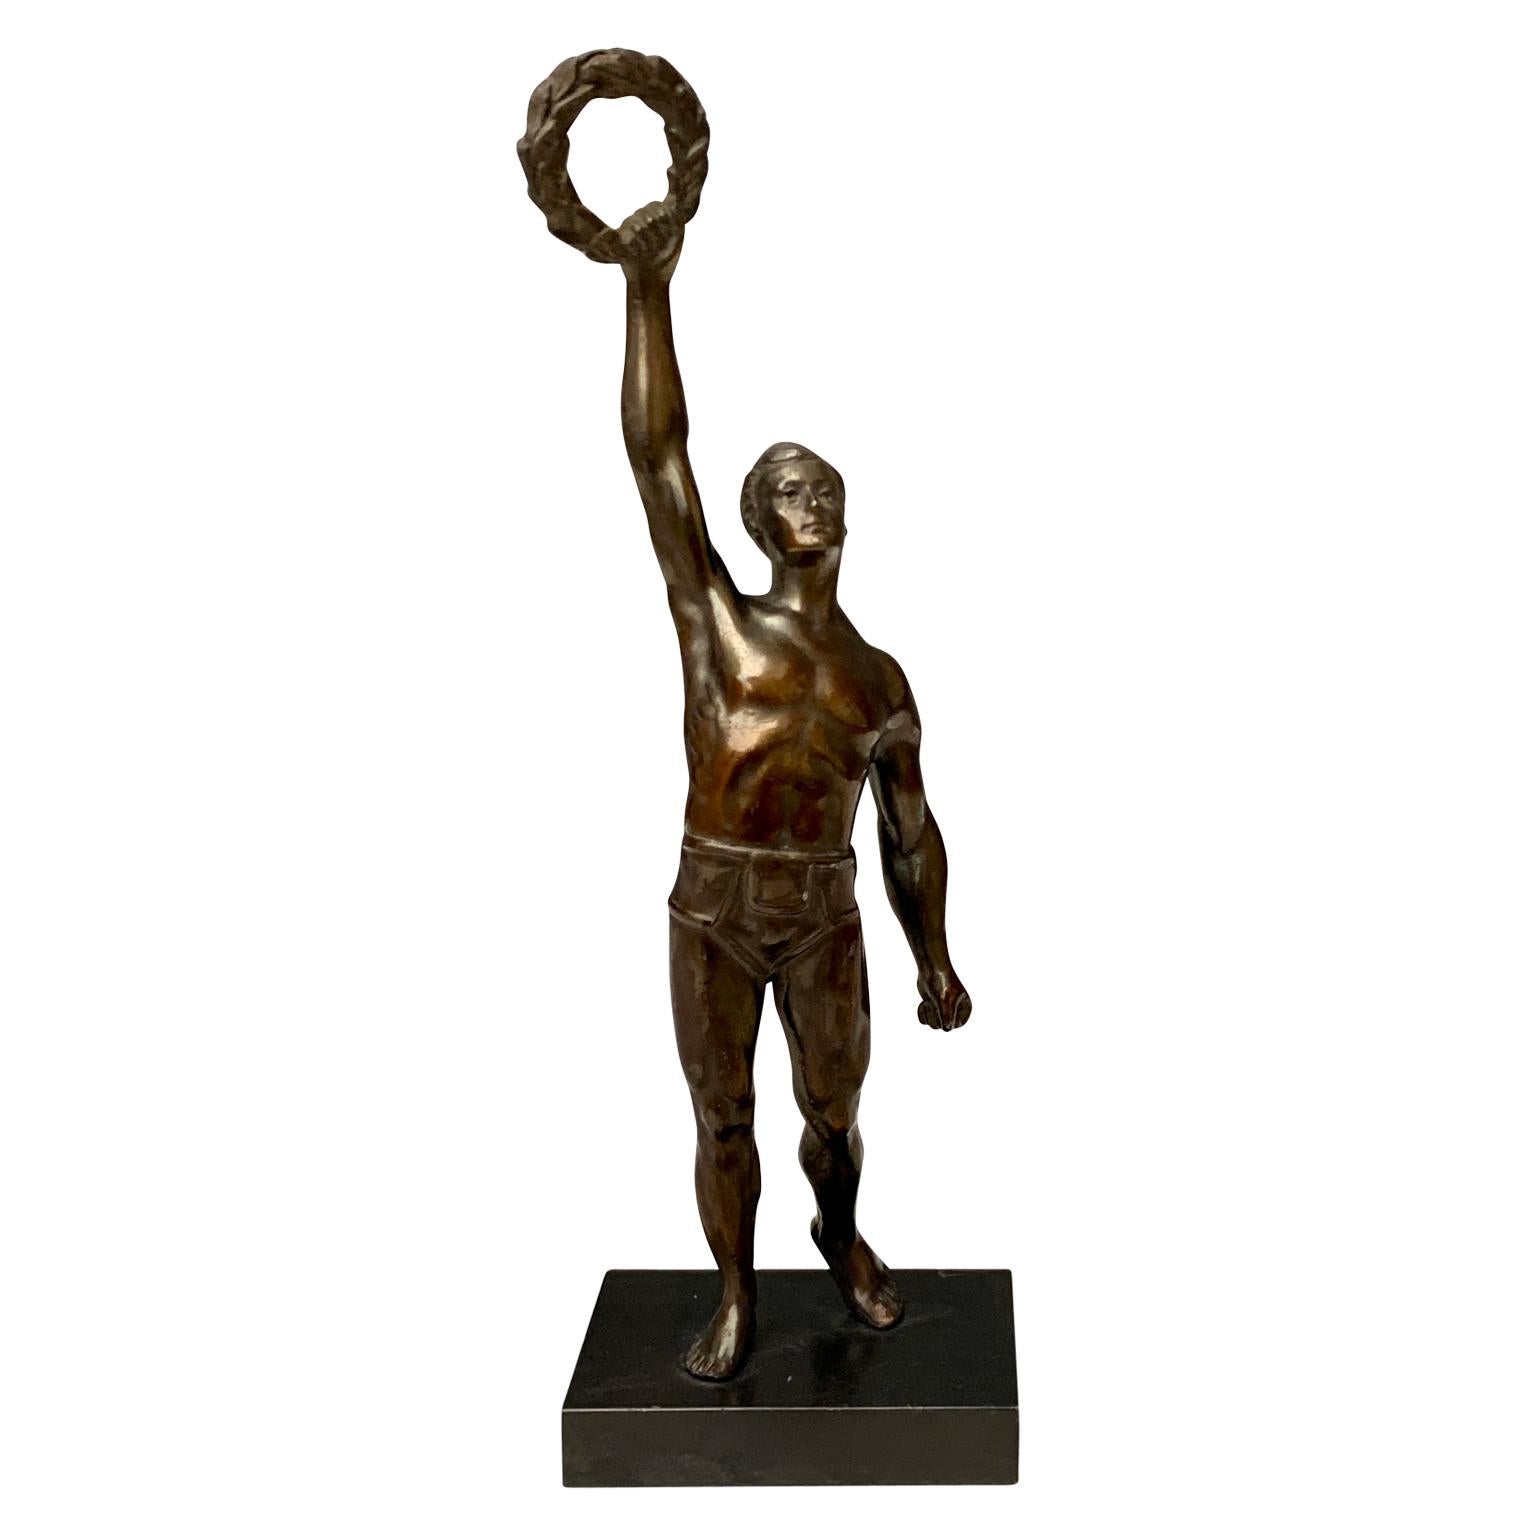 An Art Deco period sculpture in bronze on a metal base of an Olympic man who has just won. He holds the laurel-crown in with his right hand lifted up in sign of victory. This early 20th Century decorative object could have been made as a trophy for